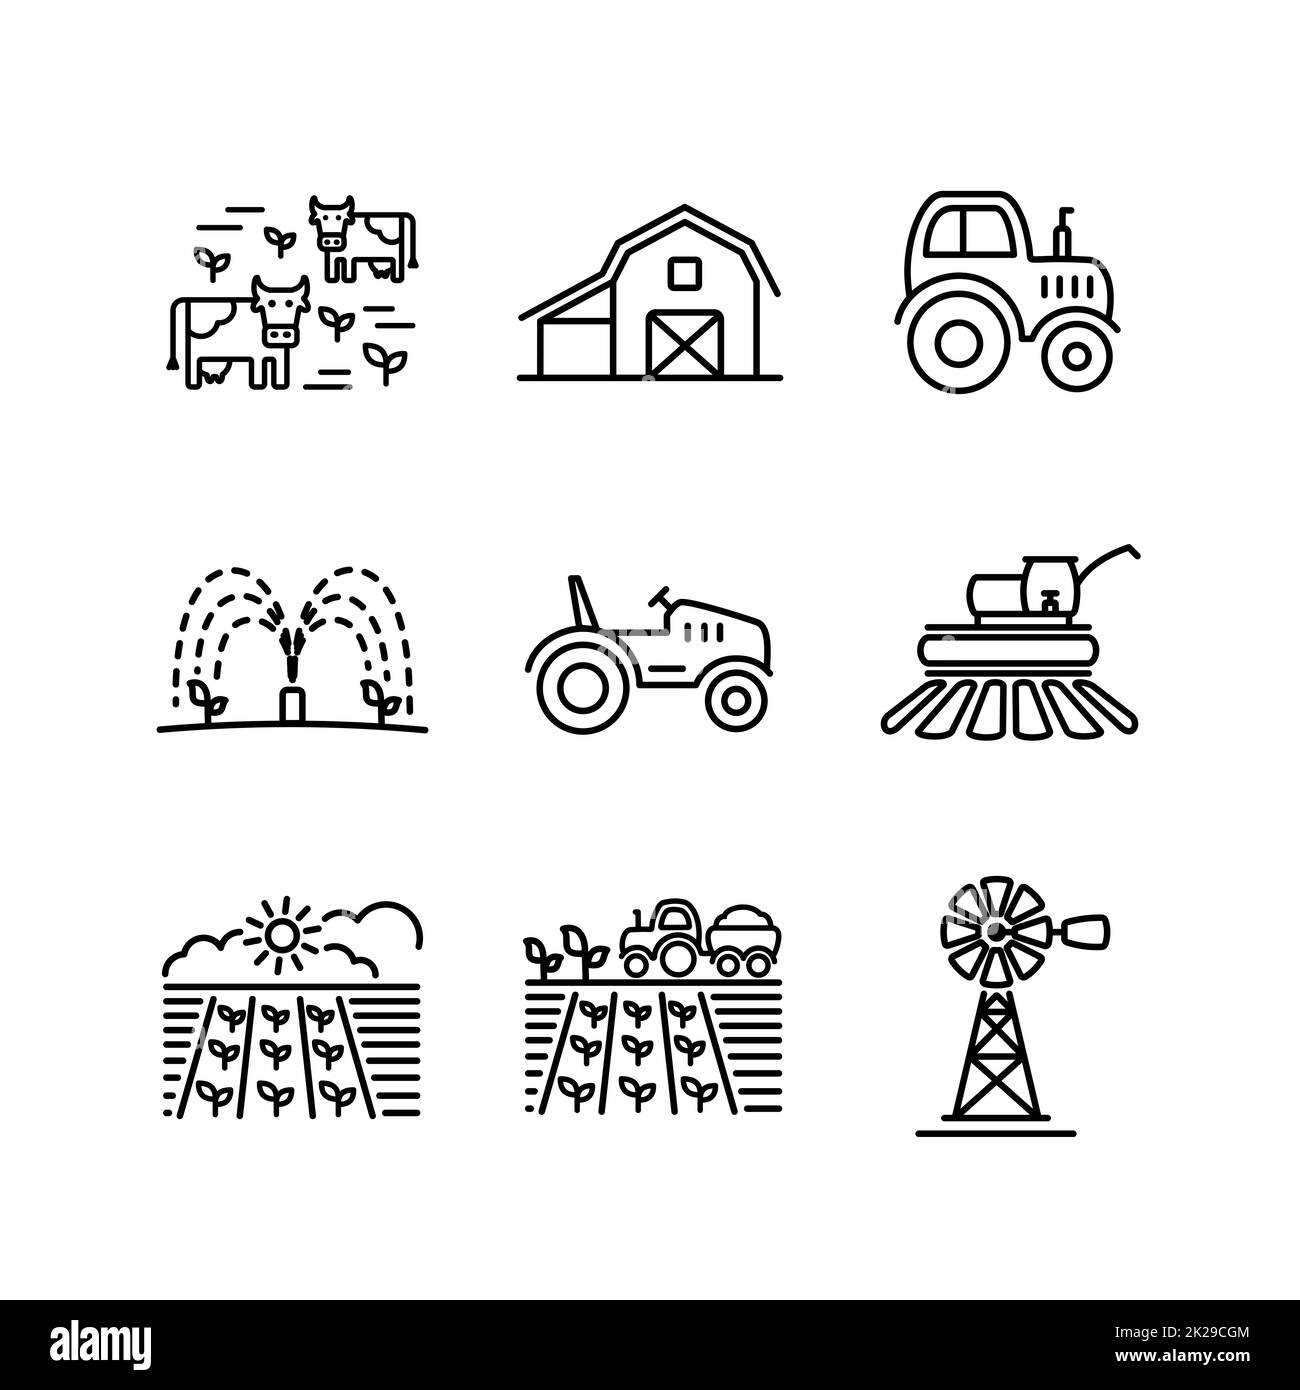 Farm Field icon. Agriculture sign Stock Photo